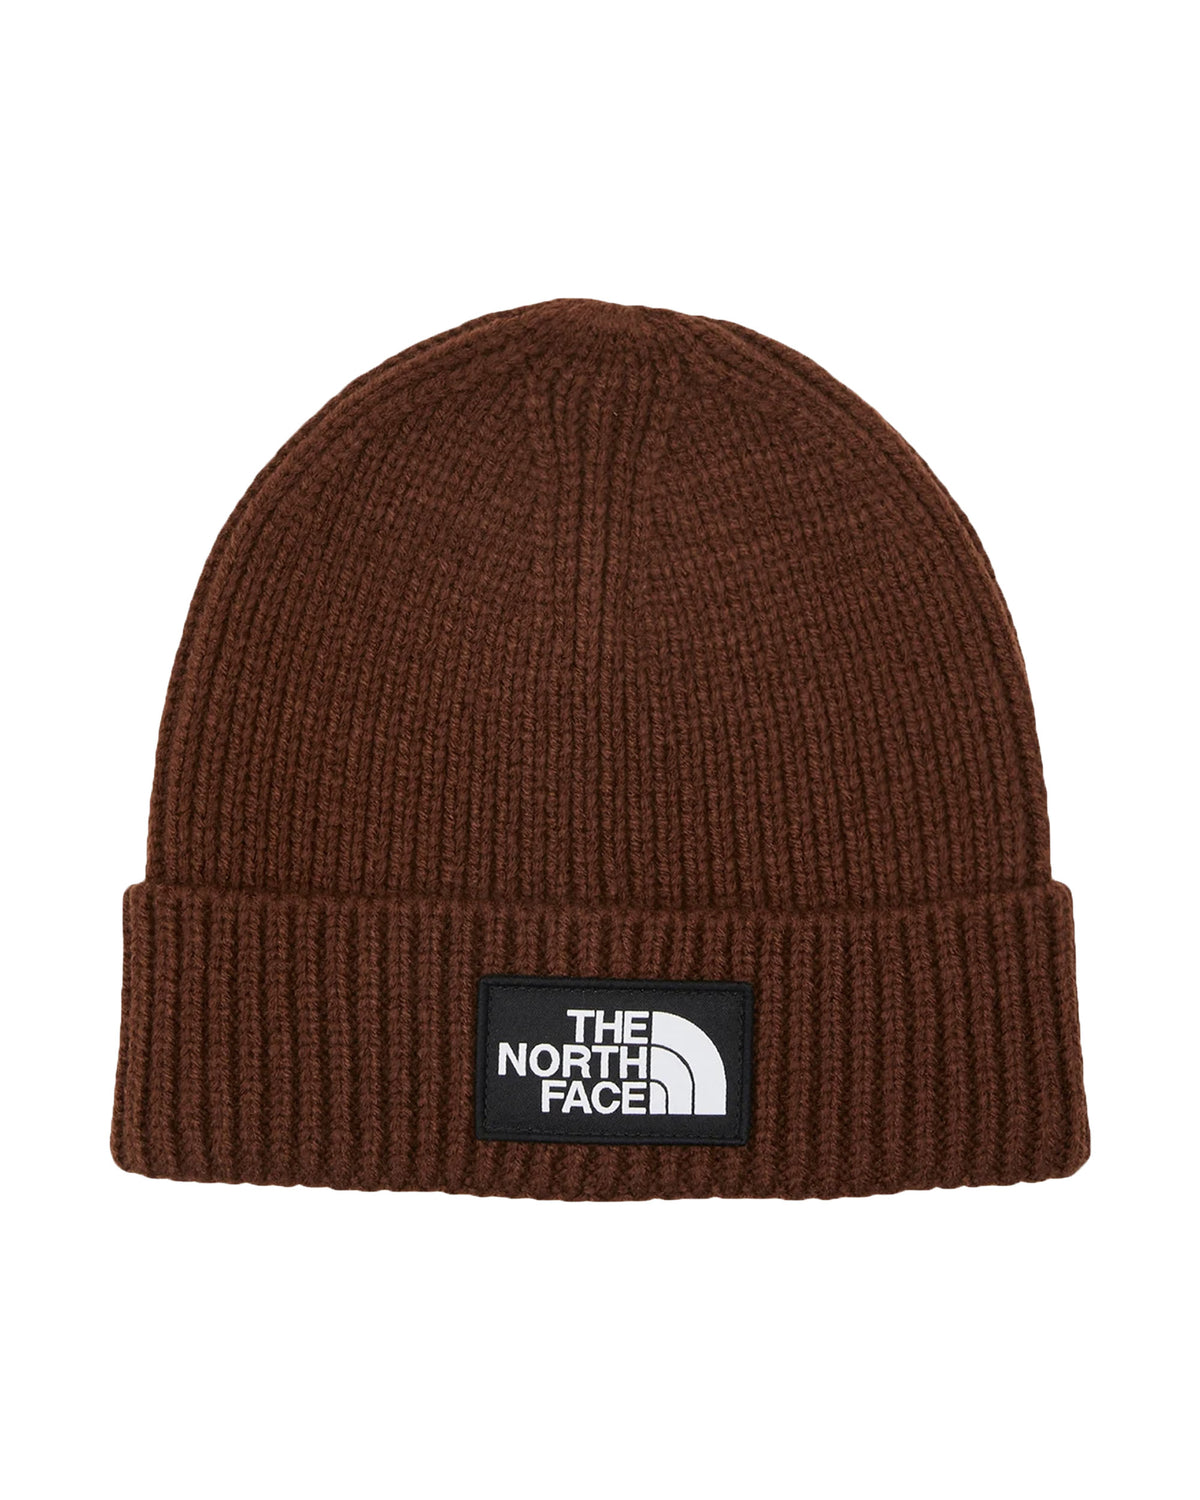 Beanie Hat The North Face Coal Brown